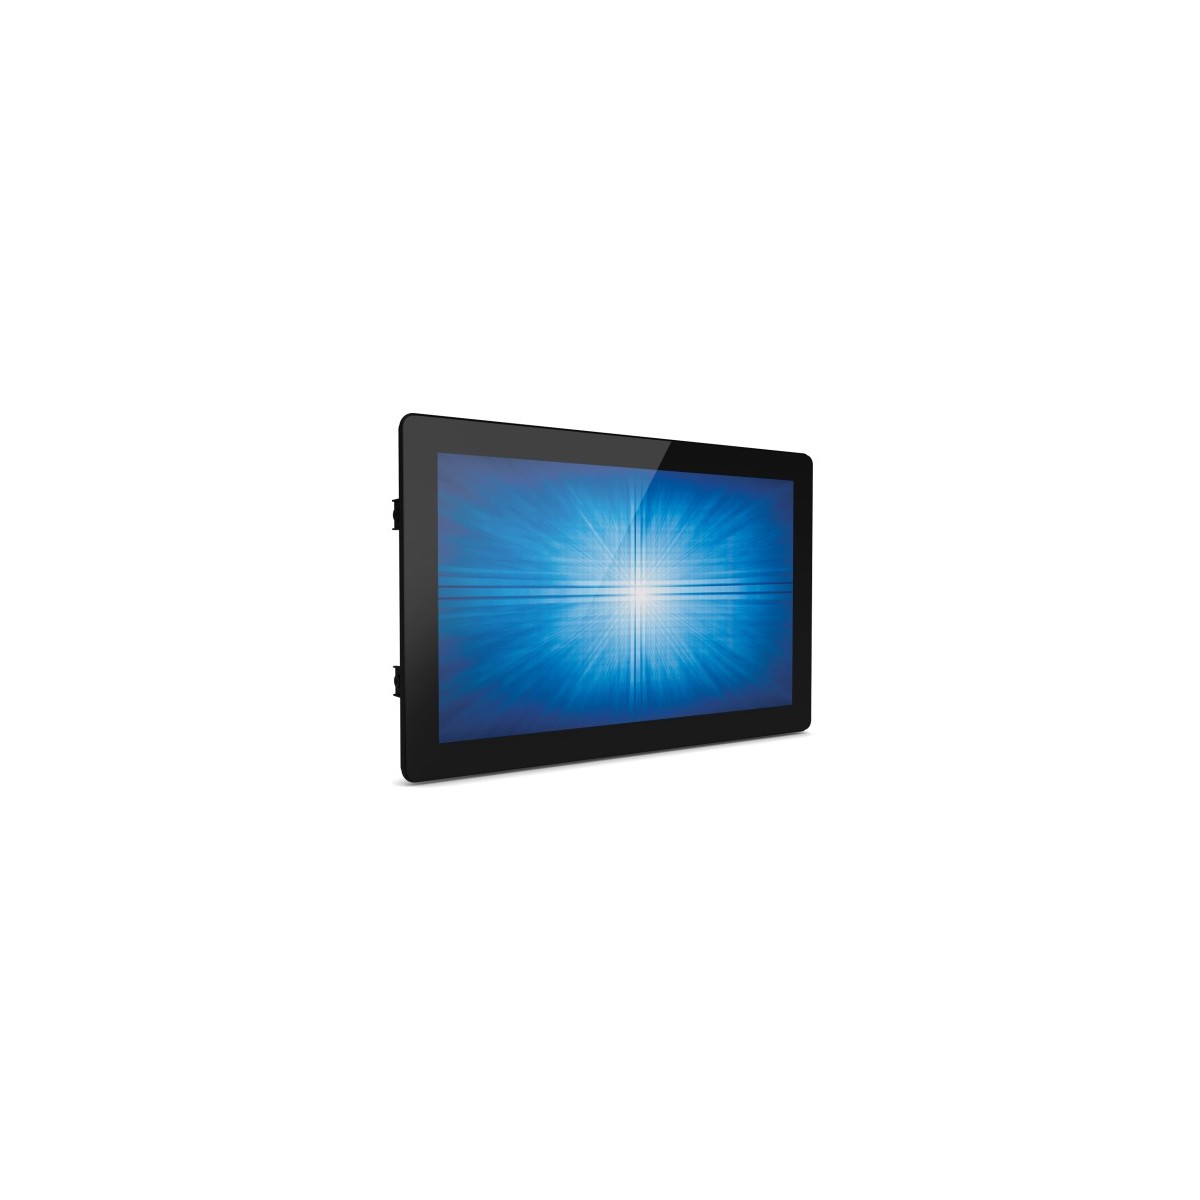 Elo Touch Solutions Elo Touch Solution 1593L - 39.6 cm (15.6) - 270 cd/m² - LCD/TFT - 10 ms - 500:1 - 1366 x 768 pixels